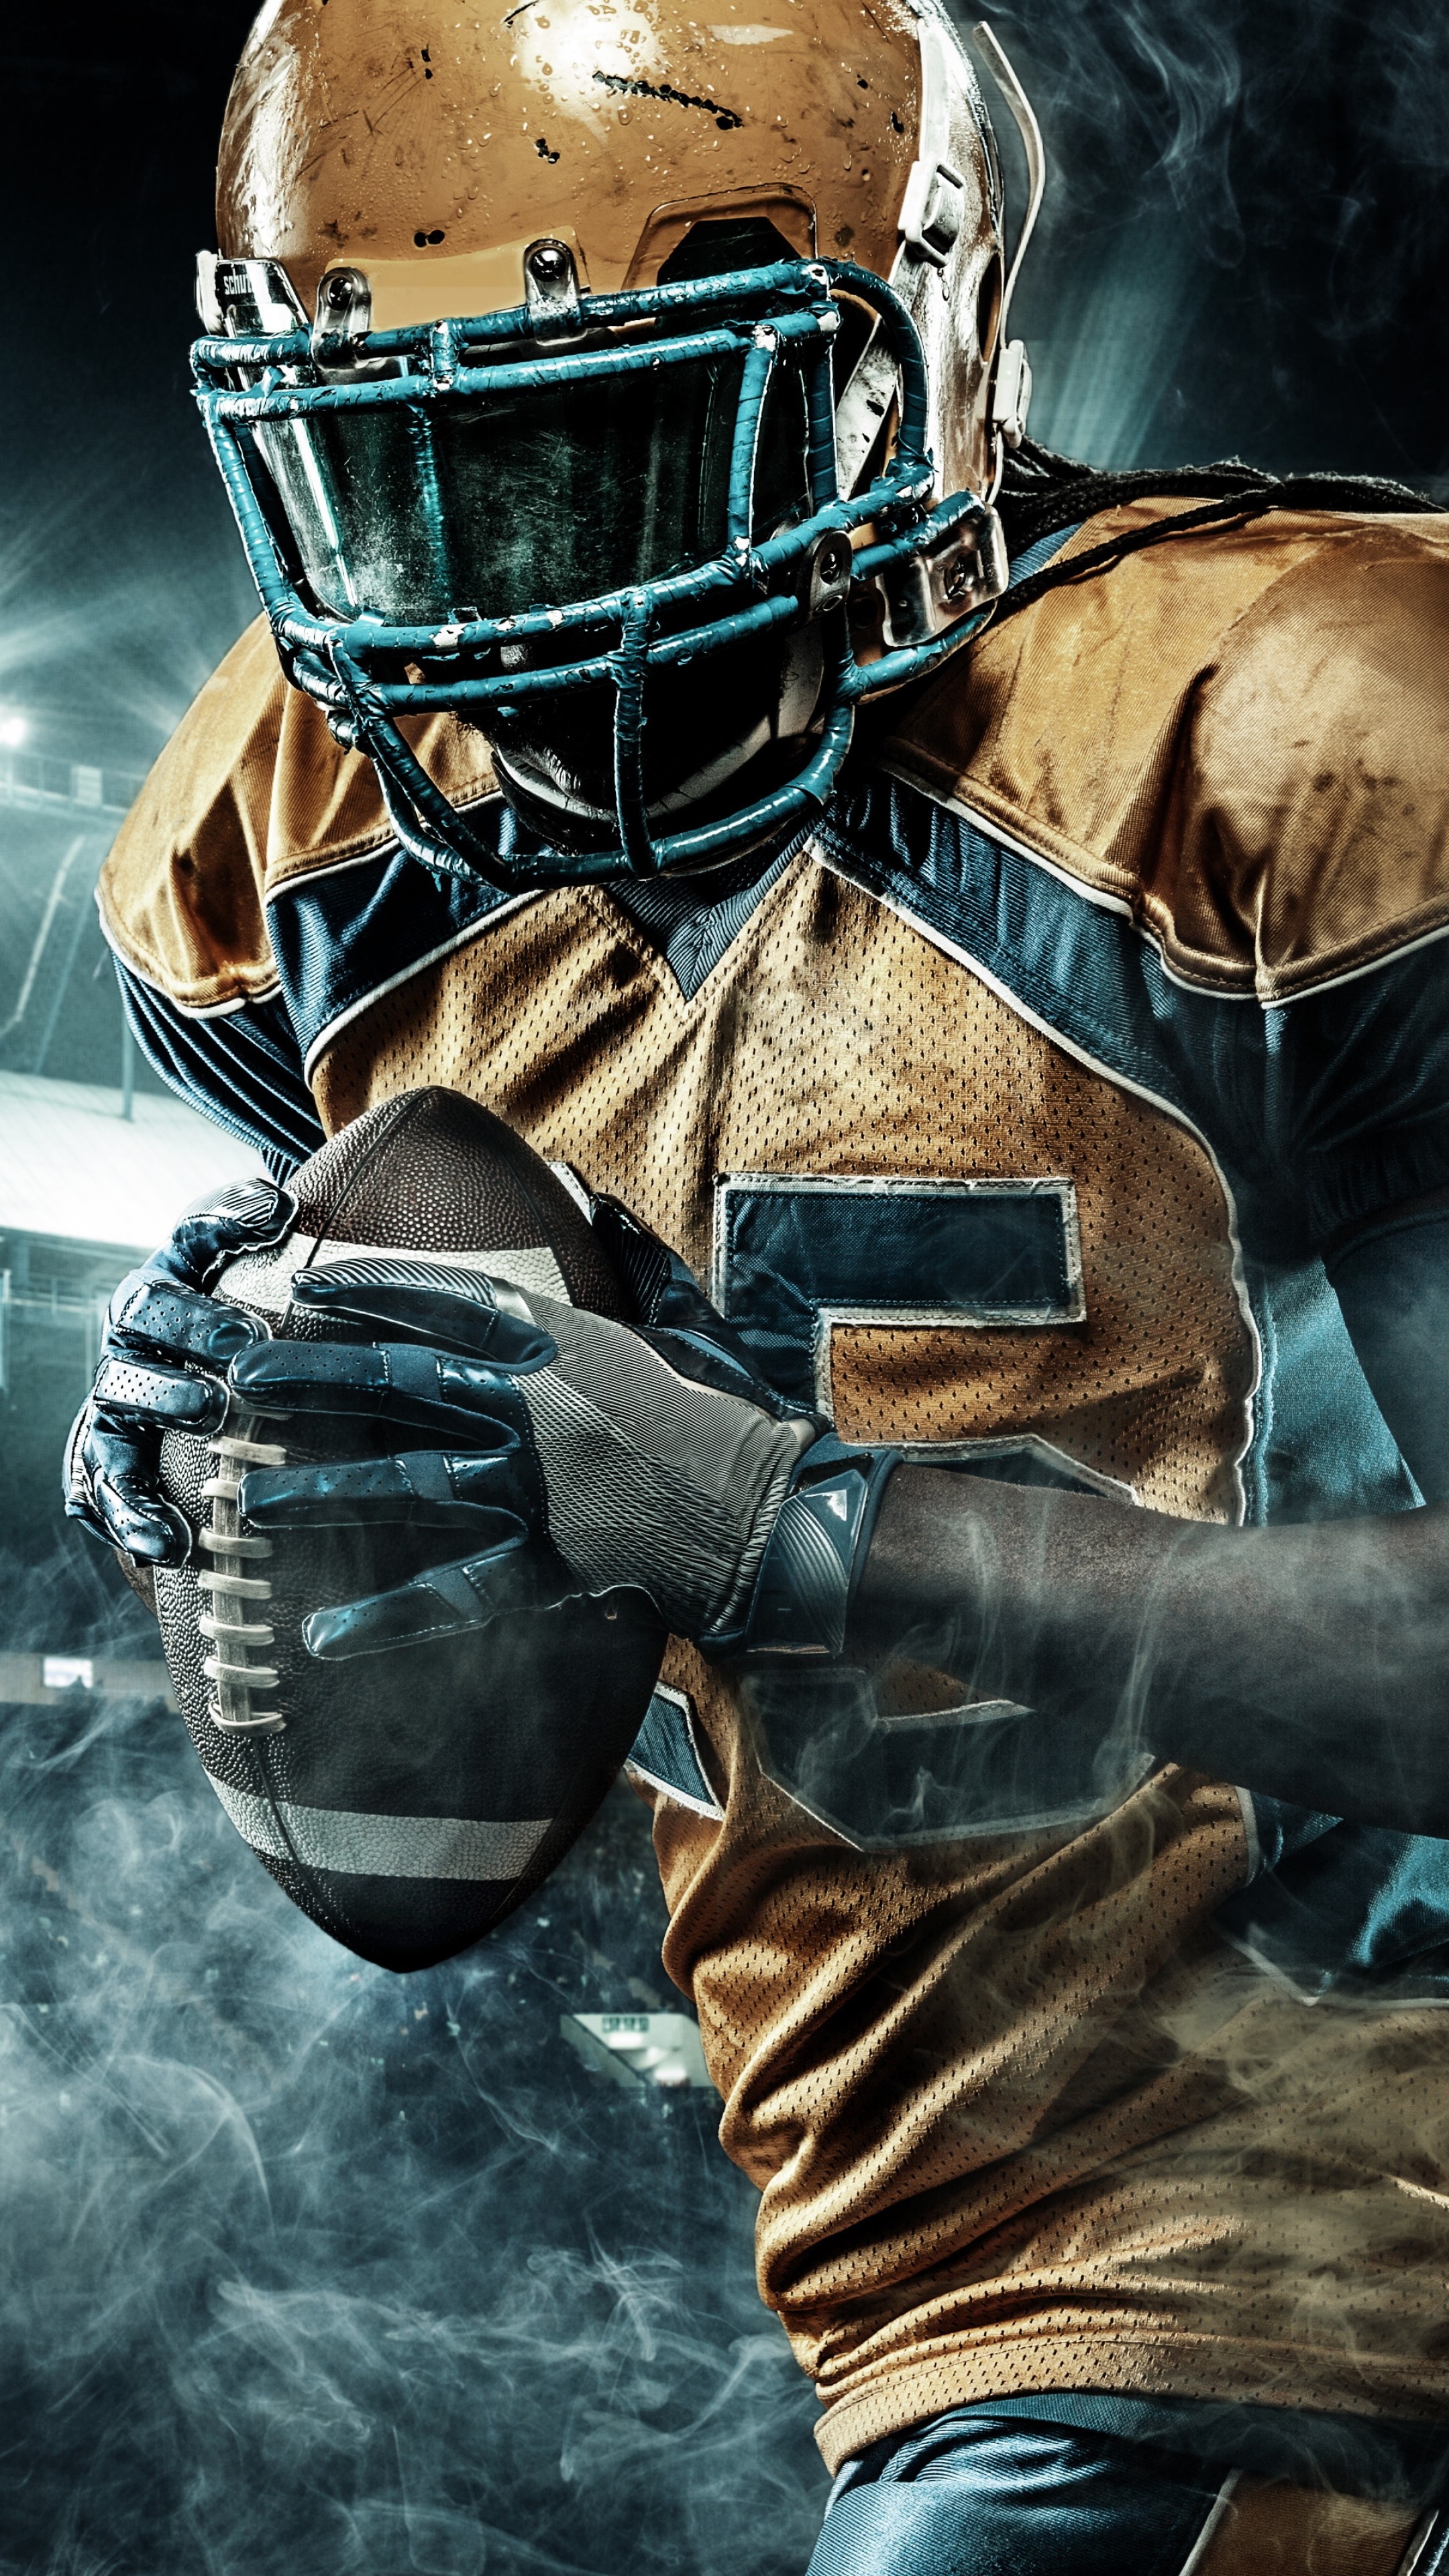 American Football: The offense must advance at least ten yards in four downs. 2160x3840 4K Background.